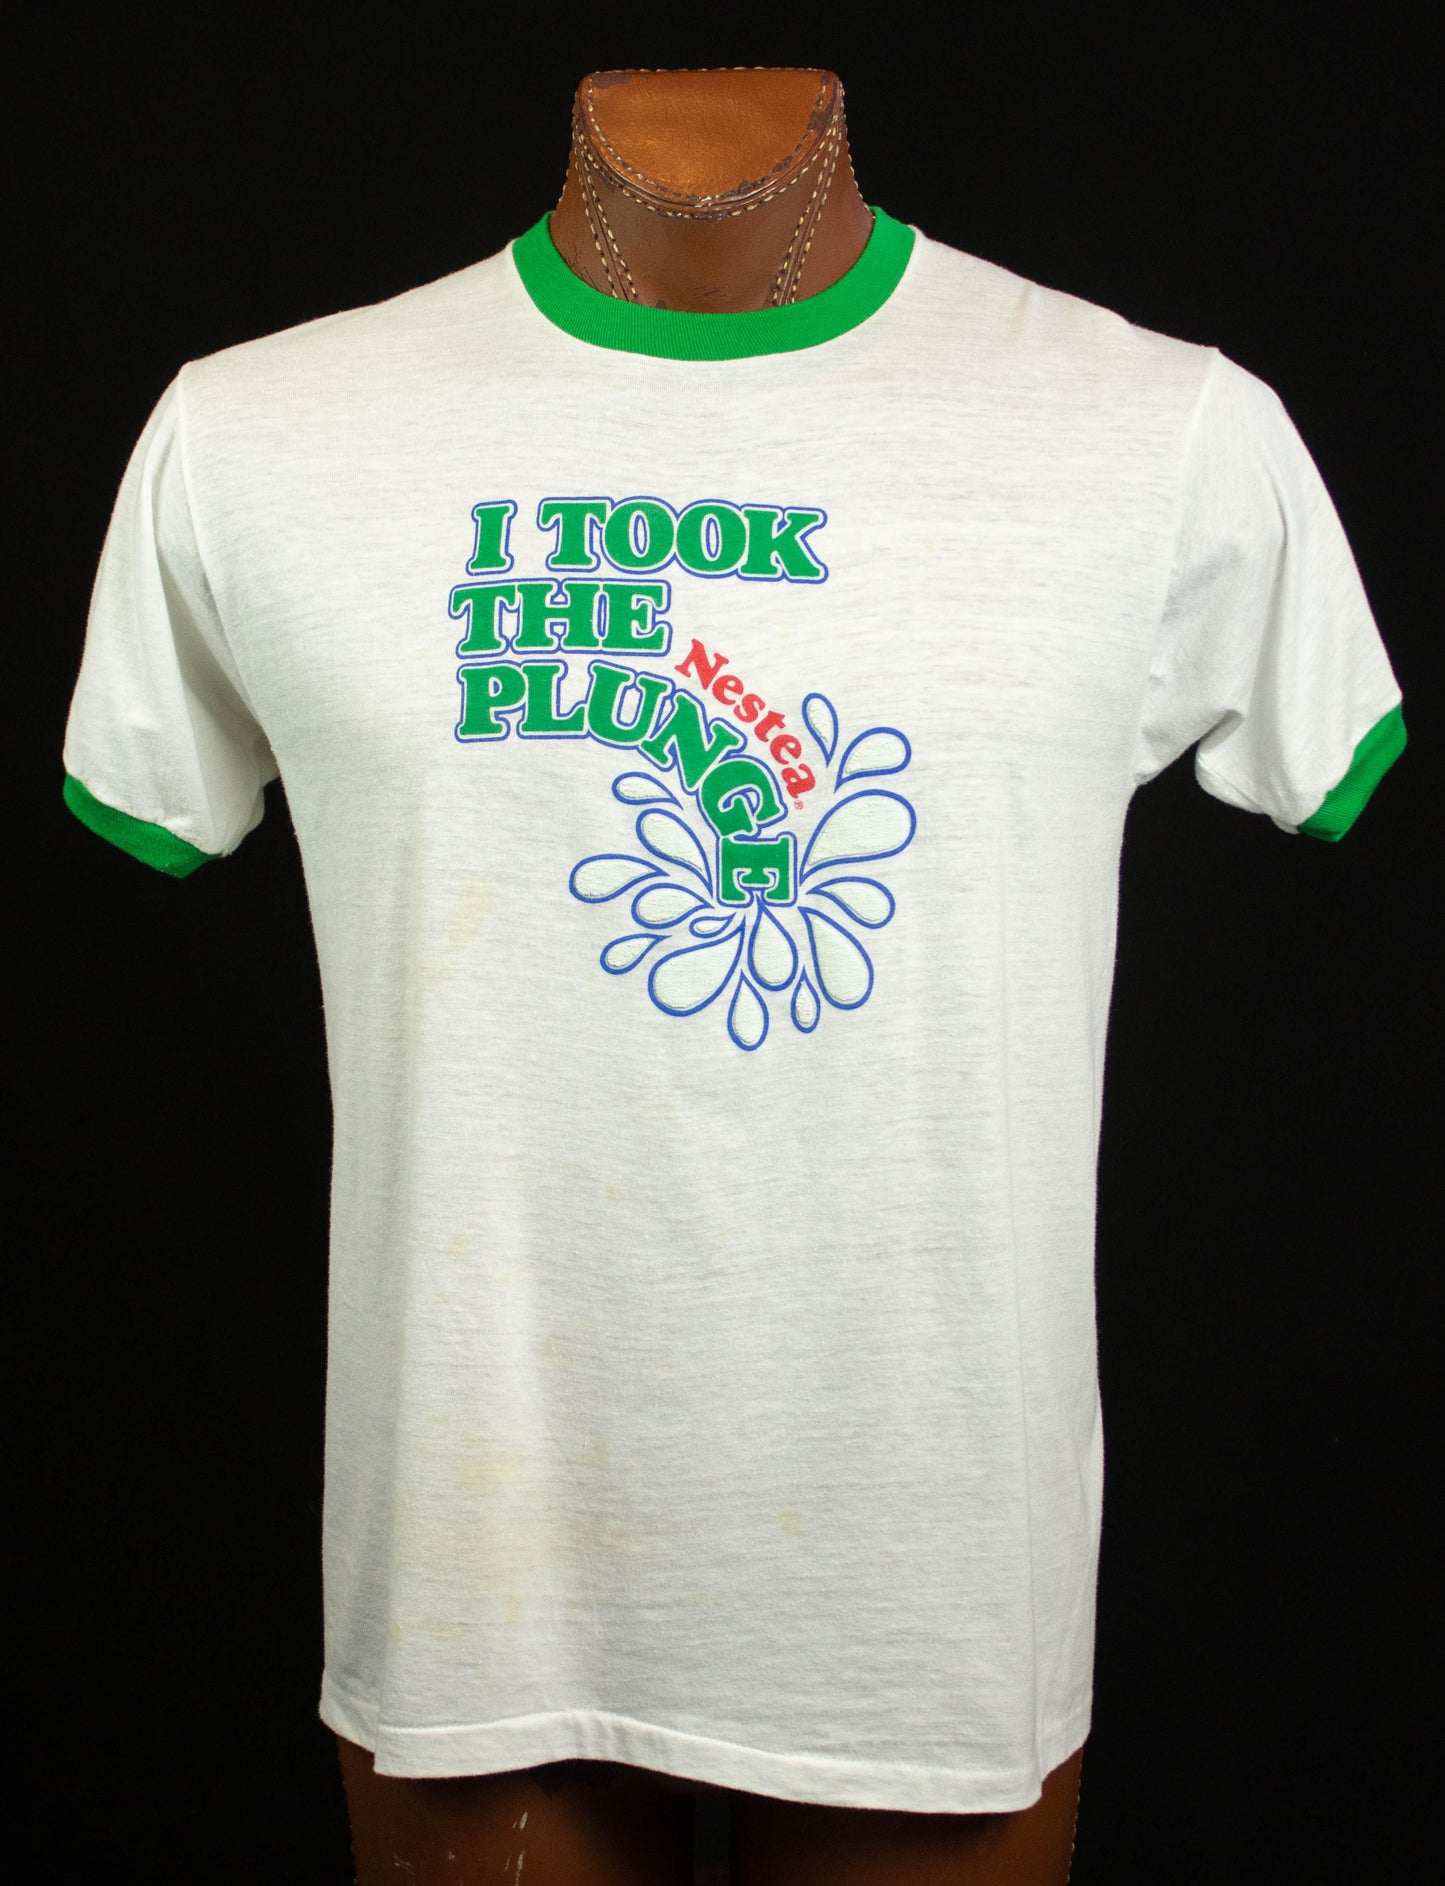 Vintage Nestea I Took The Plunge Graphic T Shirt 70s White and Green Ringer Large